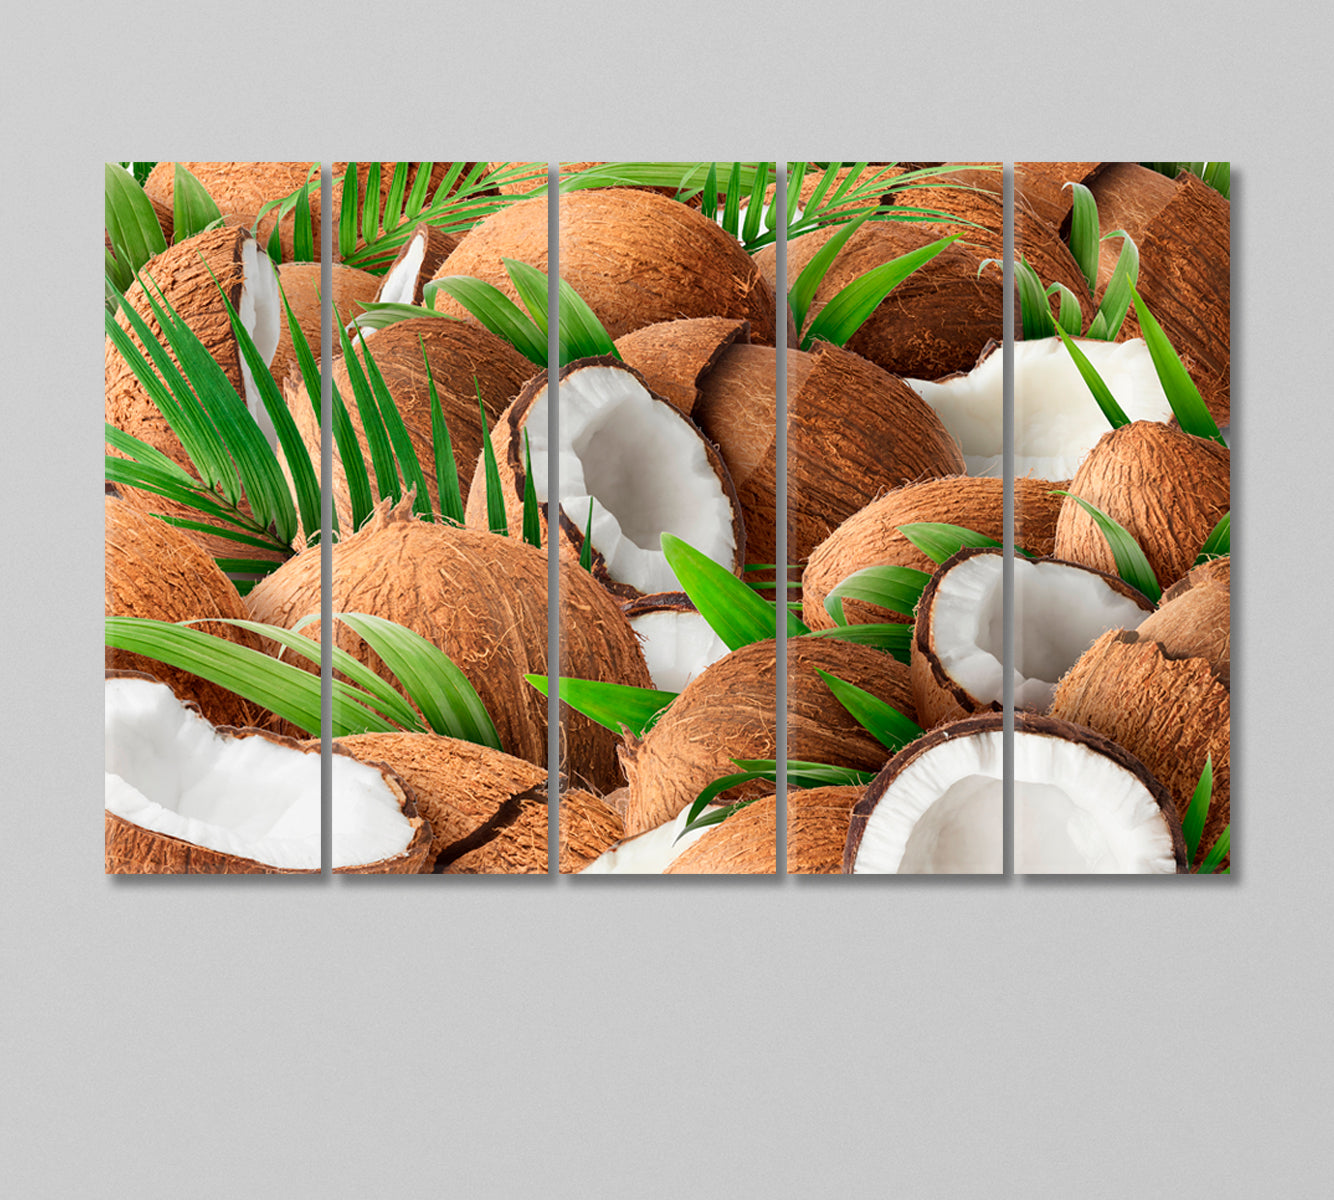 Chopped Coconuts with Palm Leaves Canvas Print-Canvas Print-CetArt-5 Panels-36x24 inches-CetArt